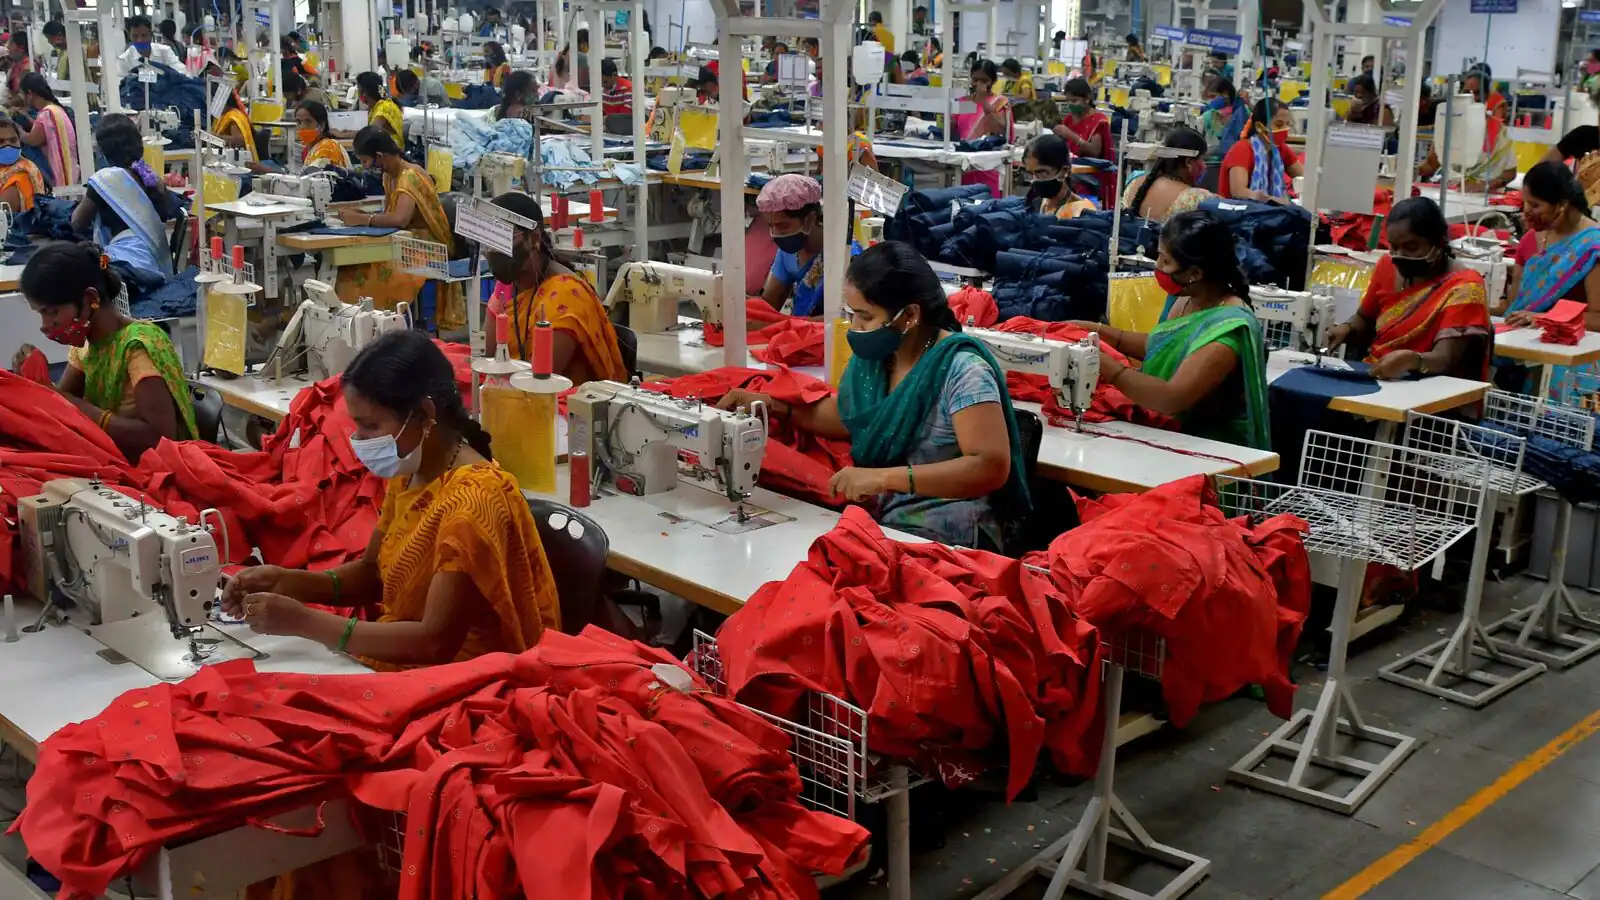 India’s Unique Advantages May Make it a Global Leader in the Textile and Apparel Industry